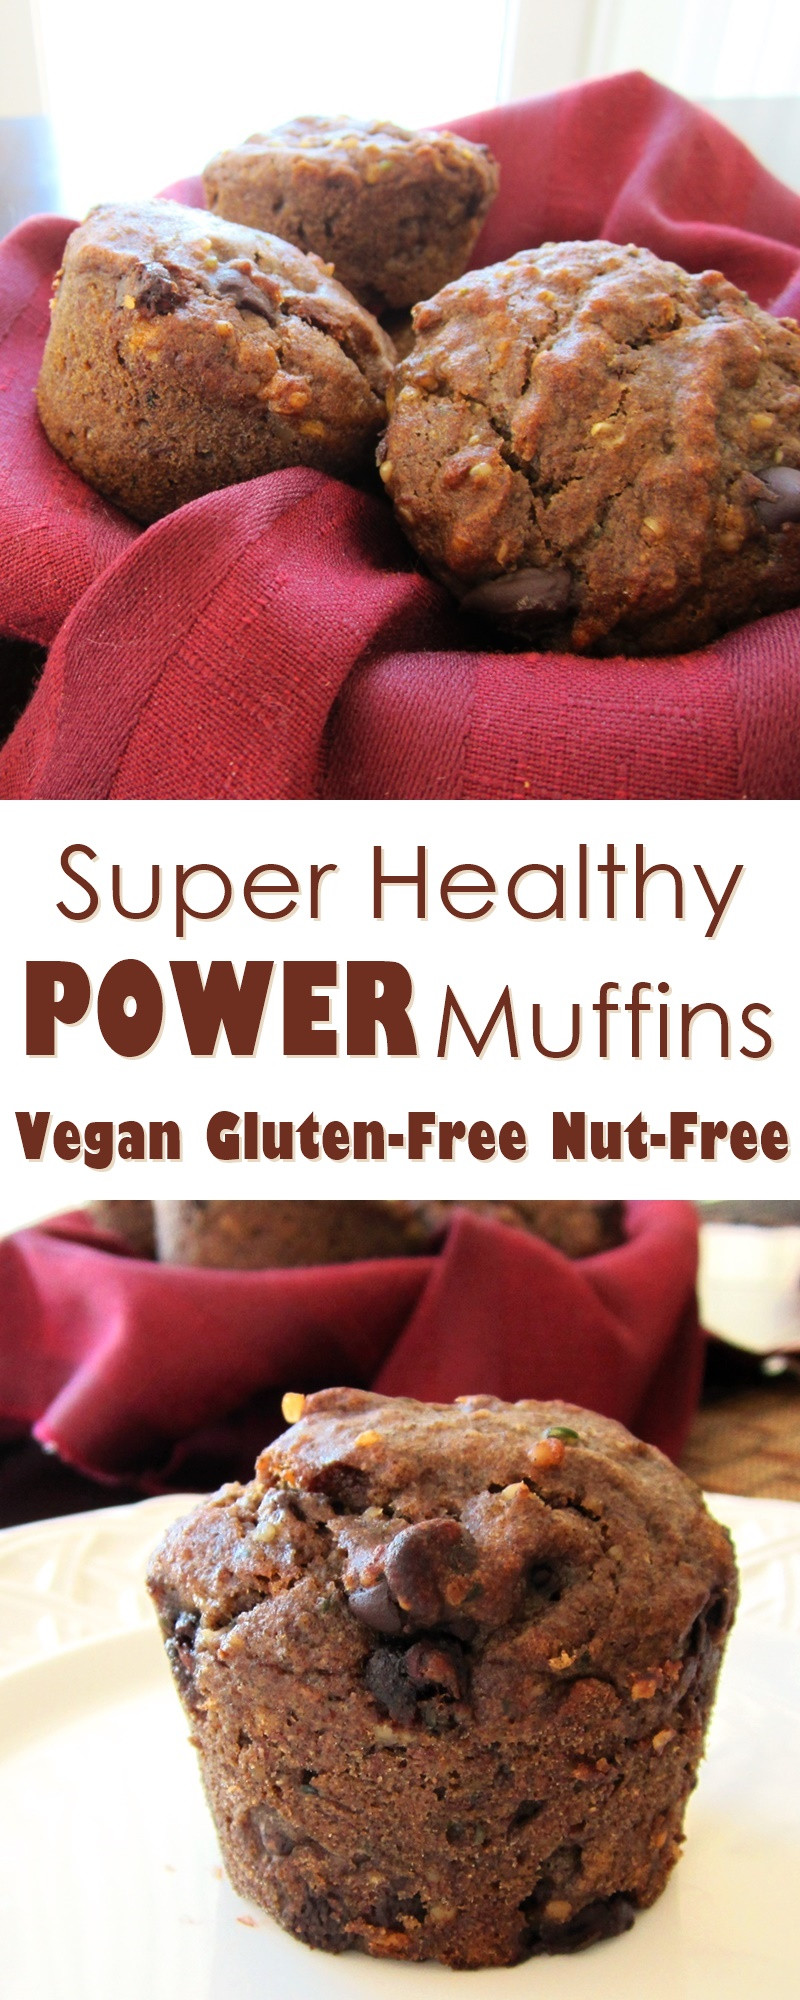 Healthy Gluten Free Muffin Recipes
 Healthy Power Vegan and Gluten Free Muffin Recipe